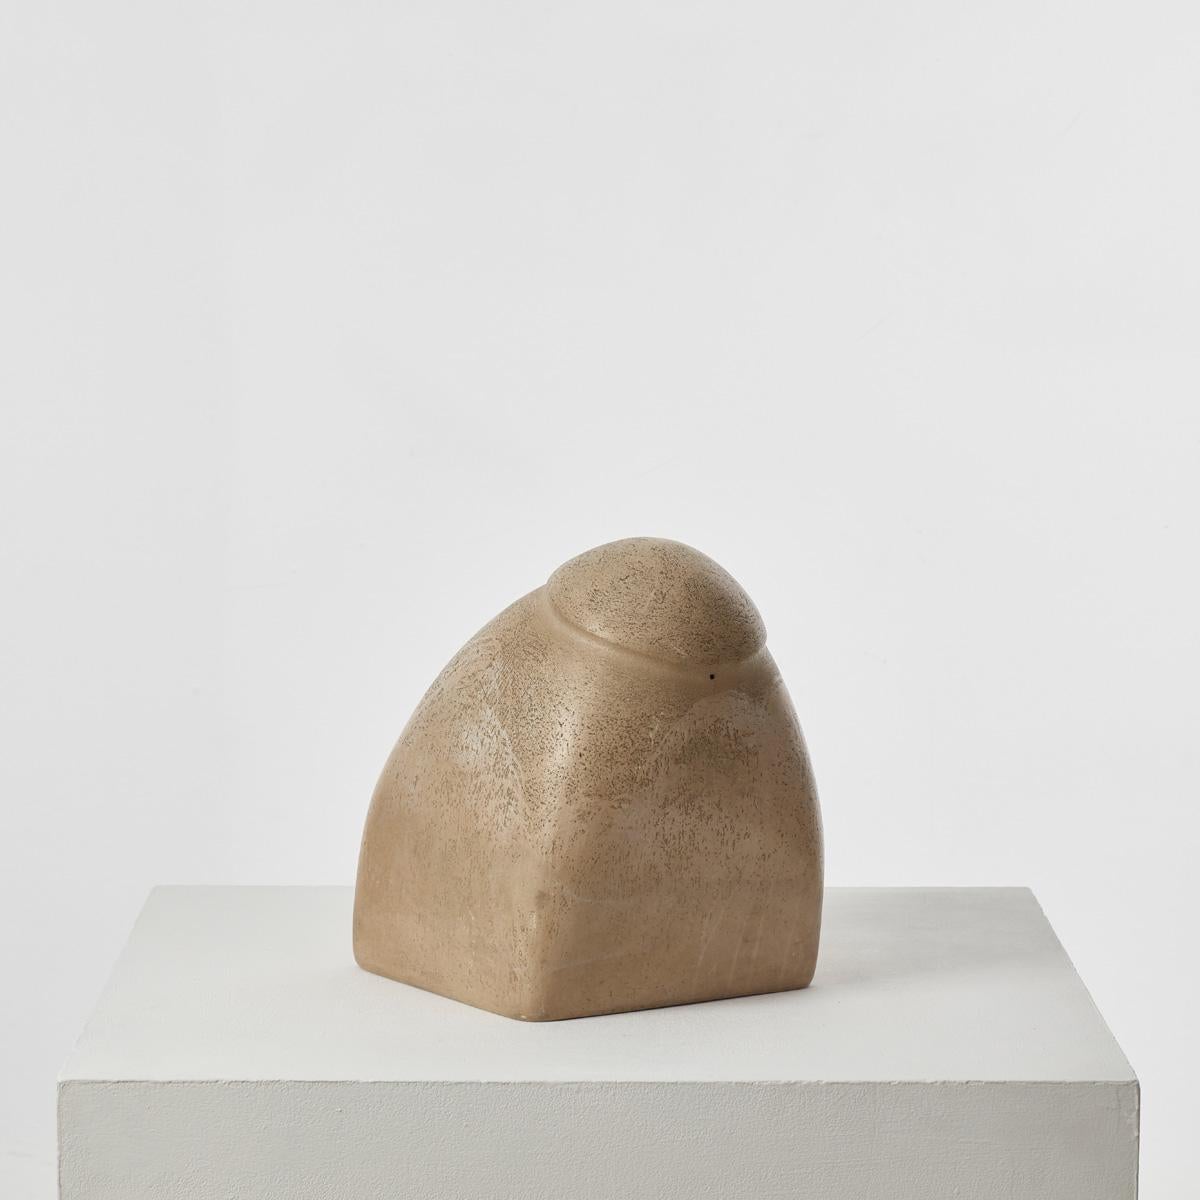 A large, biomorphic plaster sculpture with a burnished finish that sits as a solid piece with a dynamic slanted axis. It was previously owned by Sir Terence Conran (1931 – 2020). Conran, an inimitable design pioneer and businessman, “did more than